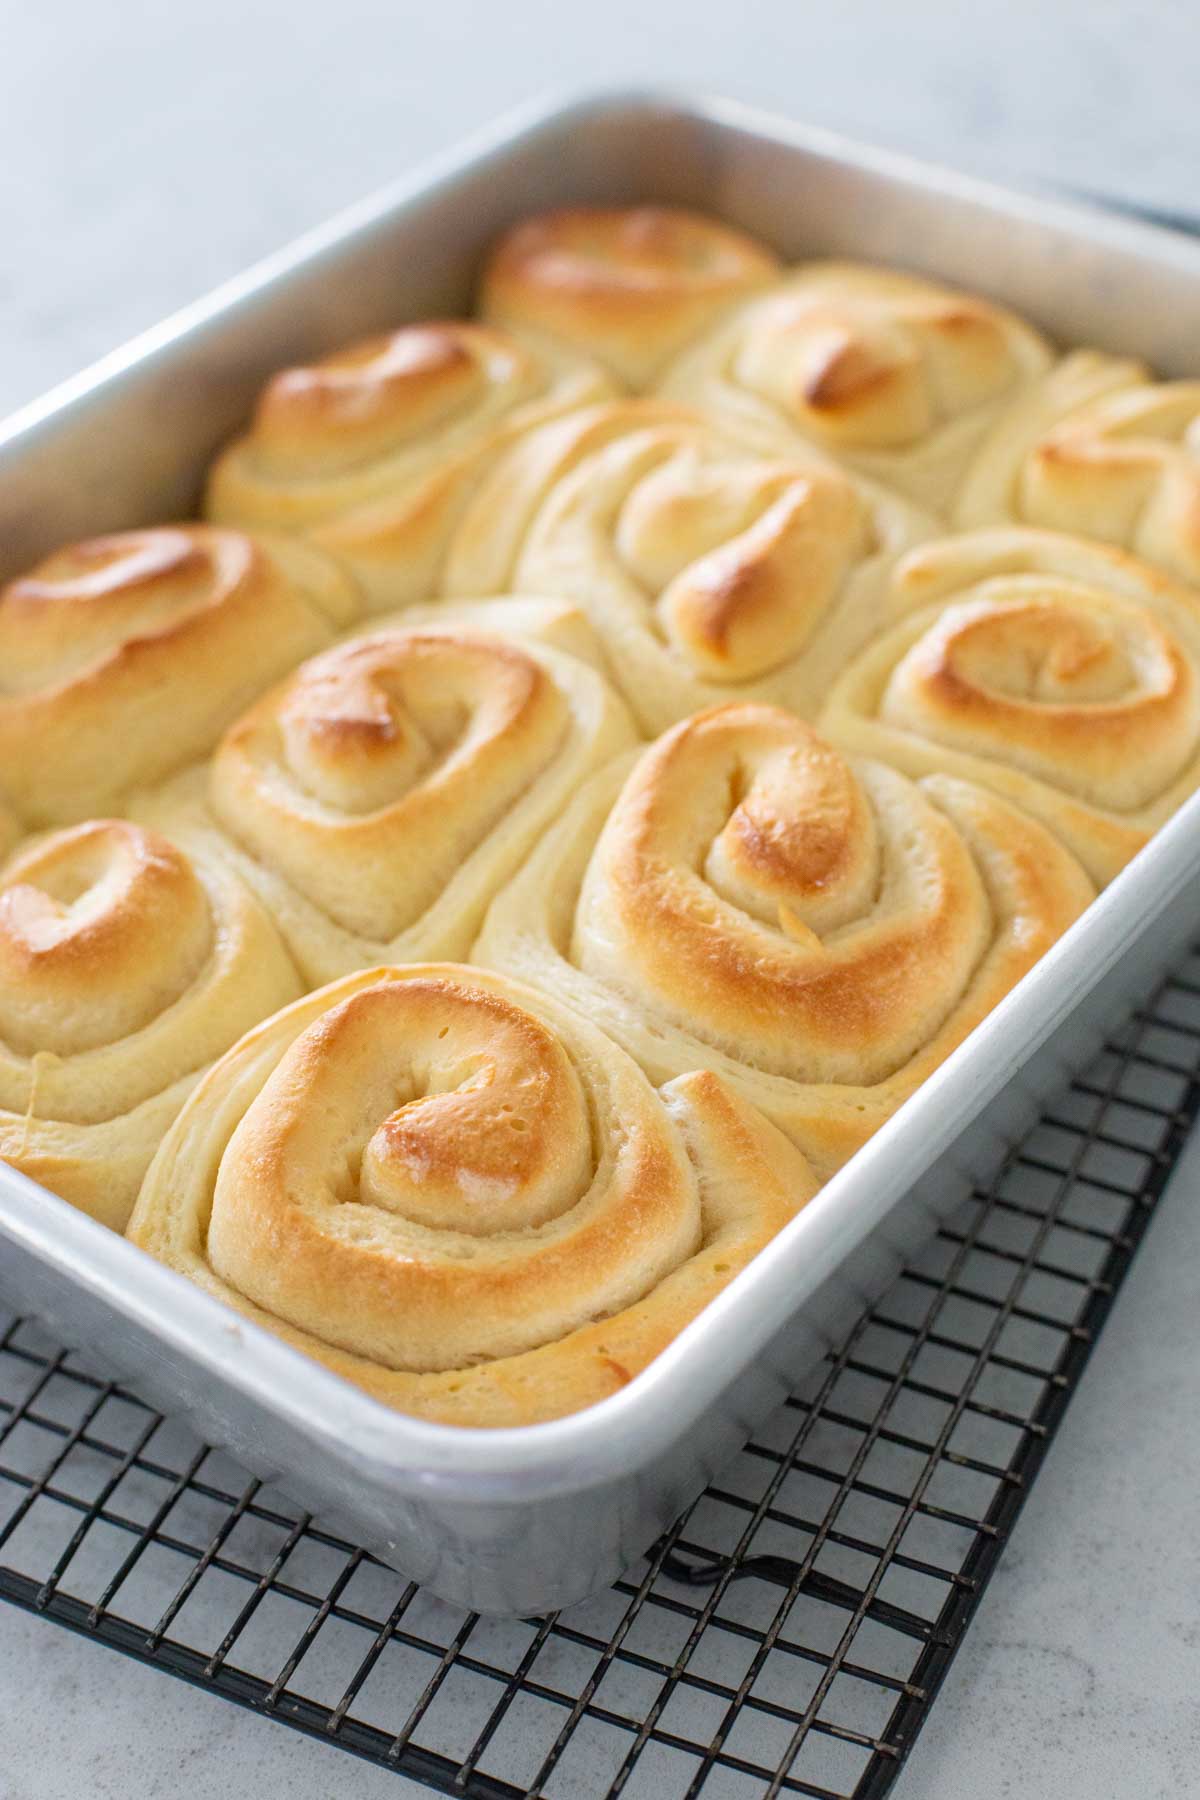 The baking pan is filled with golden brown orange rolls ready for icing.